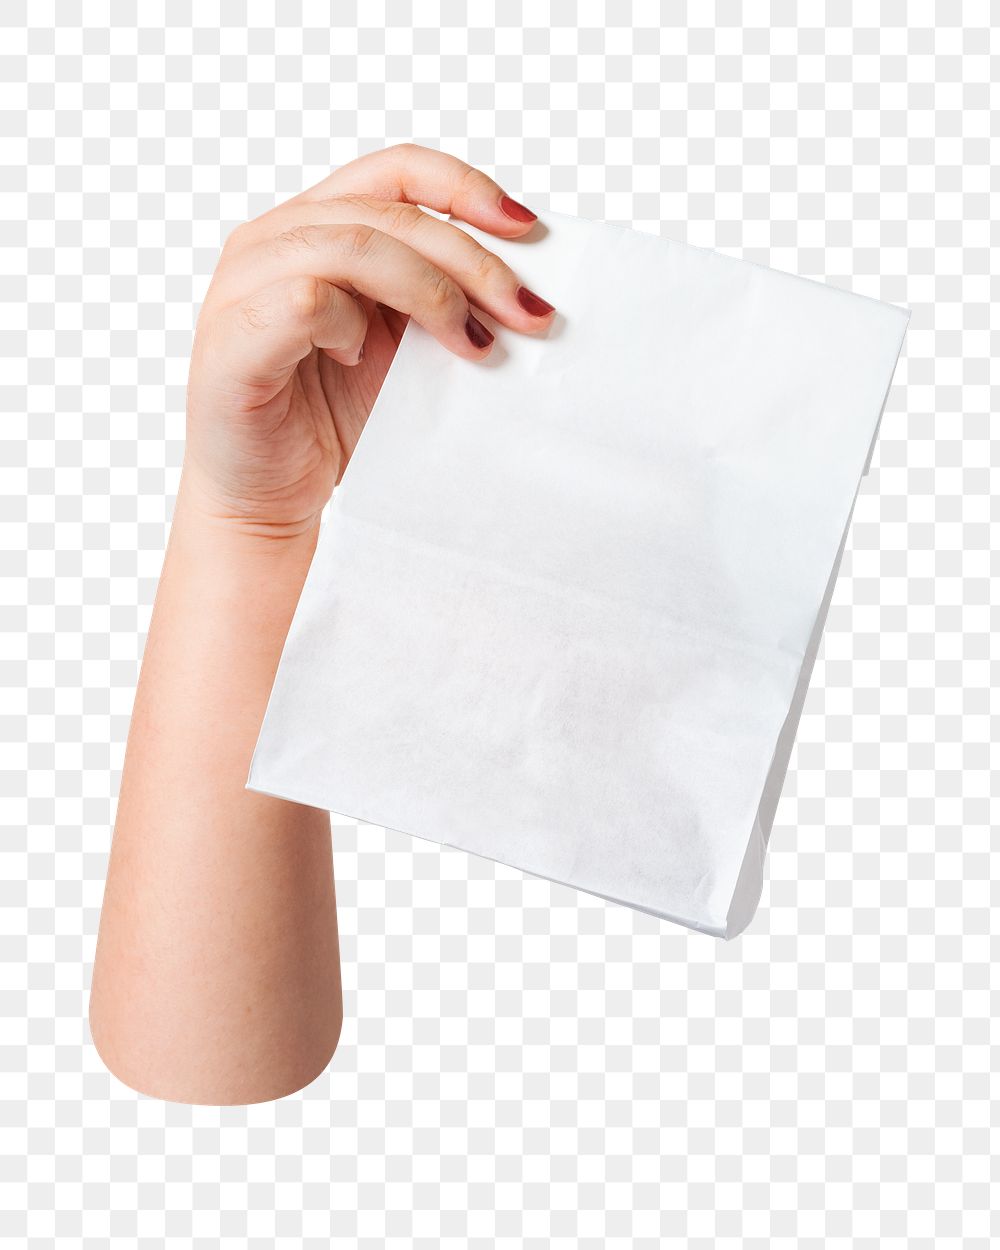 Png hand holding white paper bag, transparent background